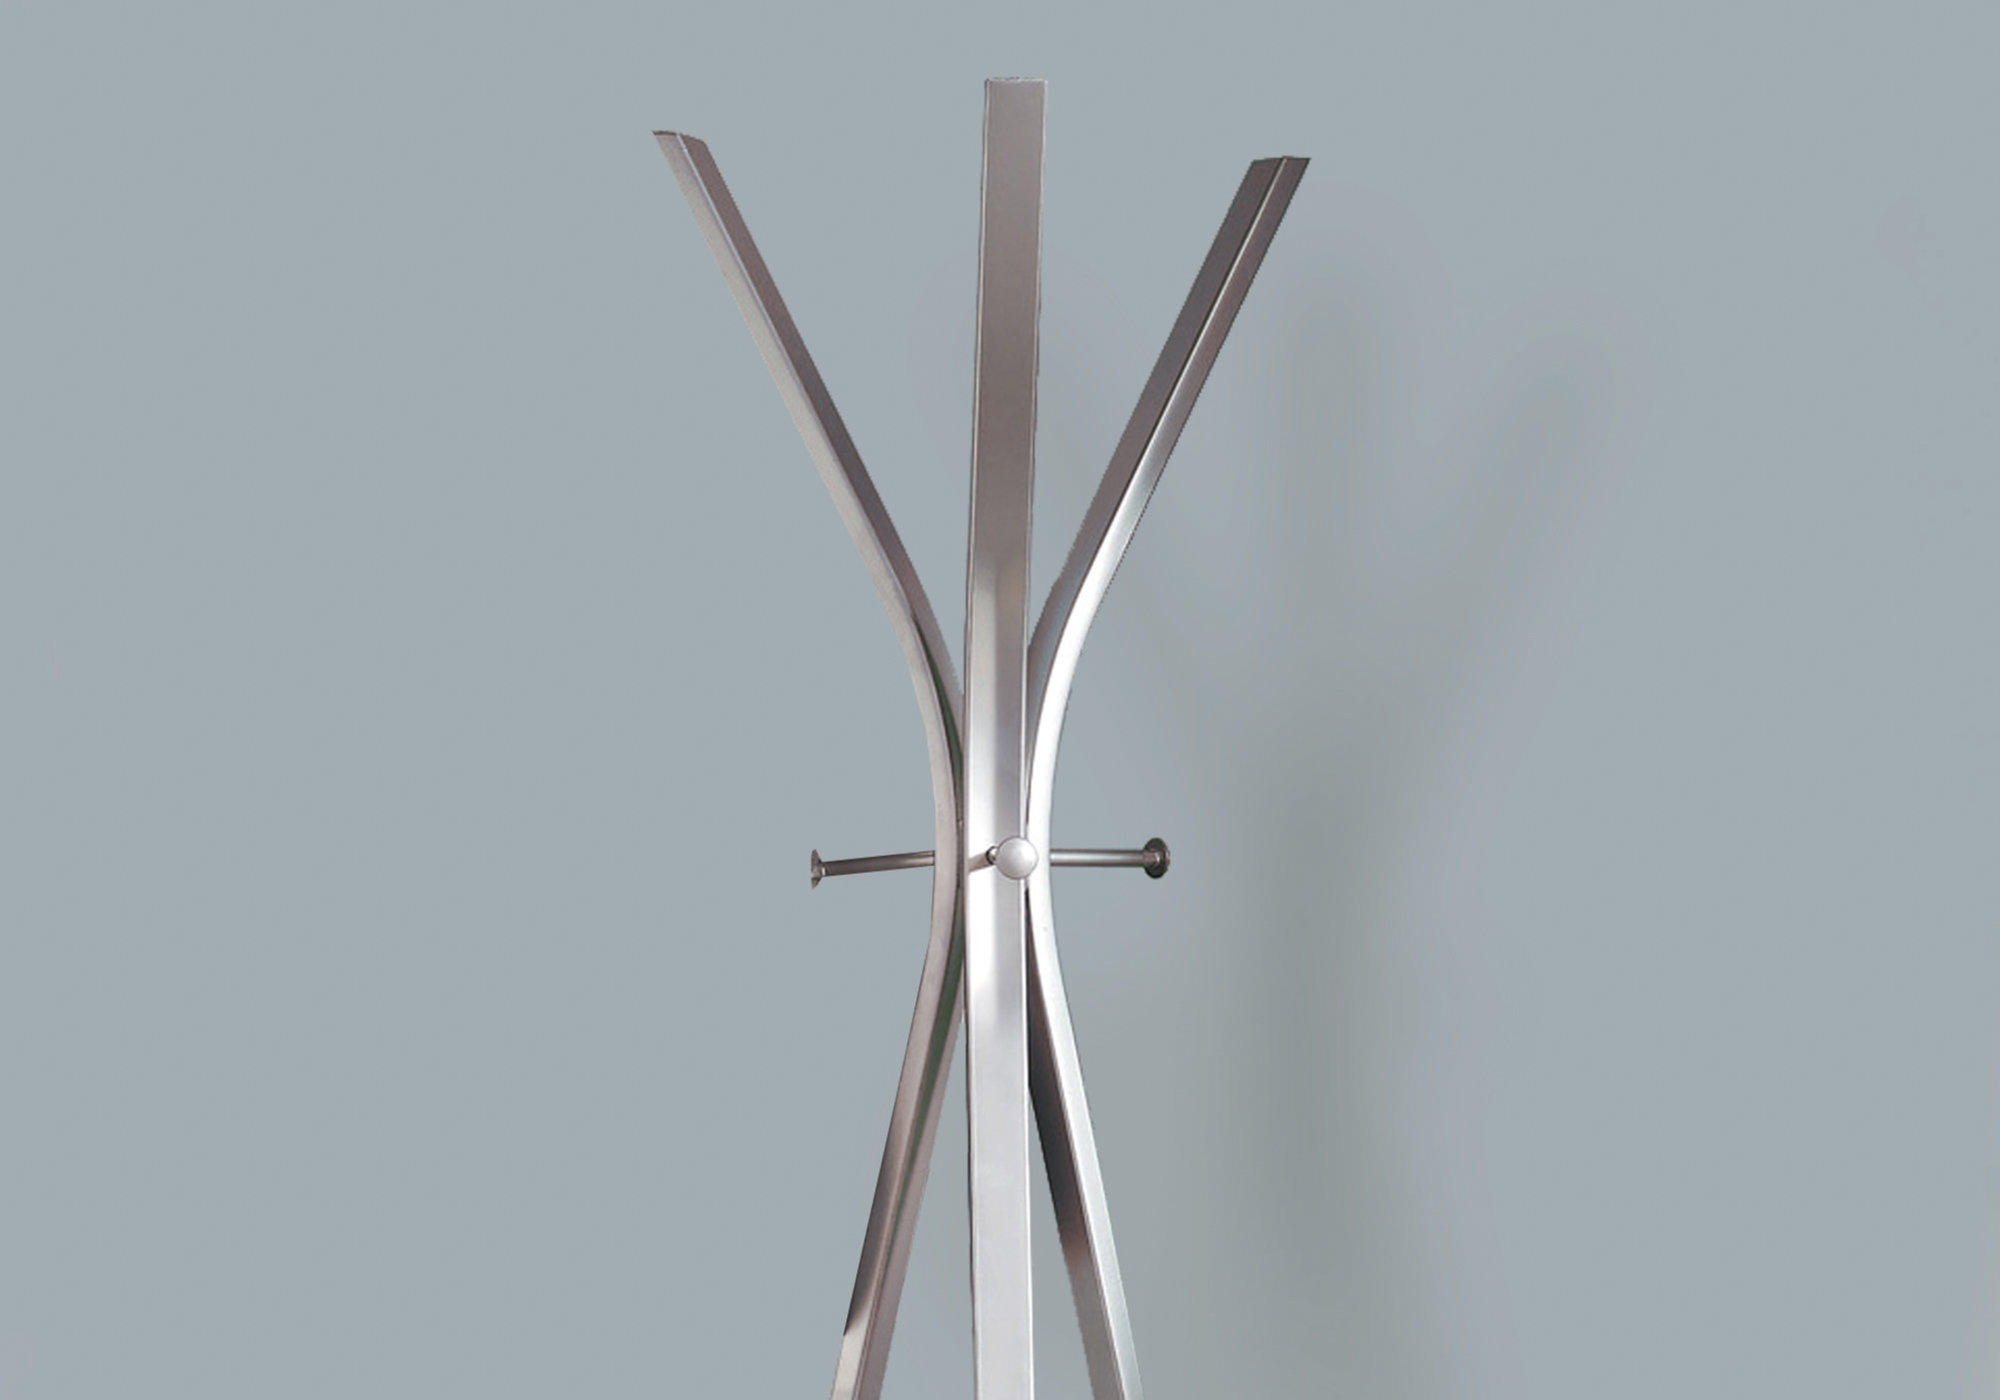 COAT RACK - 72"H / SILVER METAL CONTEMPORARY STYLE